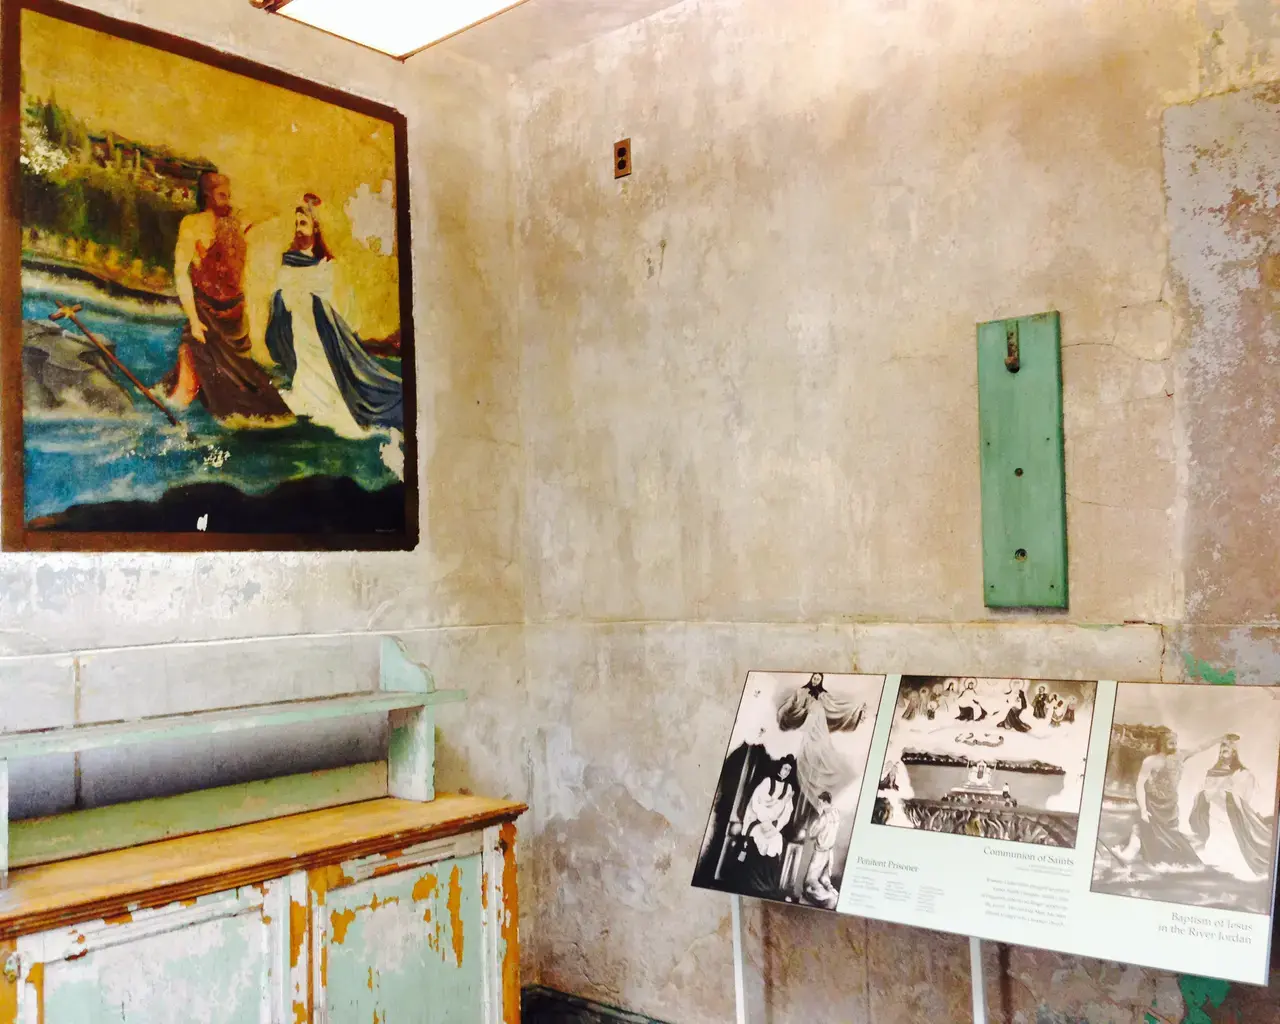 The completed Catholic Chaplain&rsquo;s Office includes new signs interpreting the space and the murals. Courtesy of Eastern State Penitentiary.